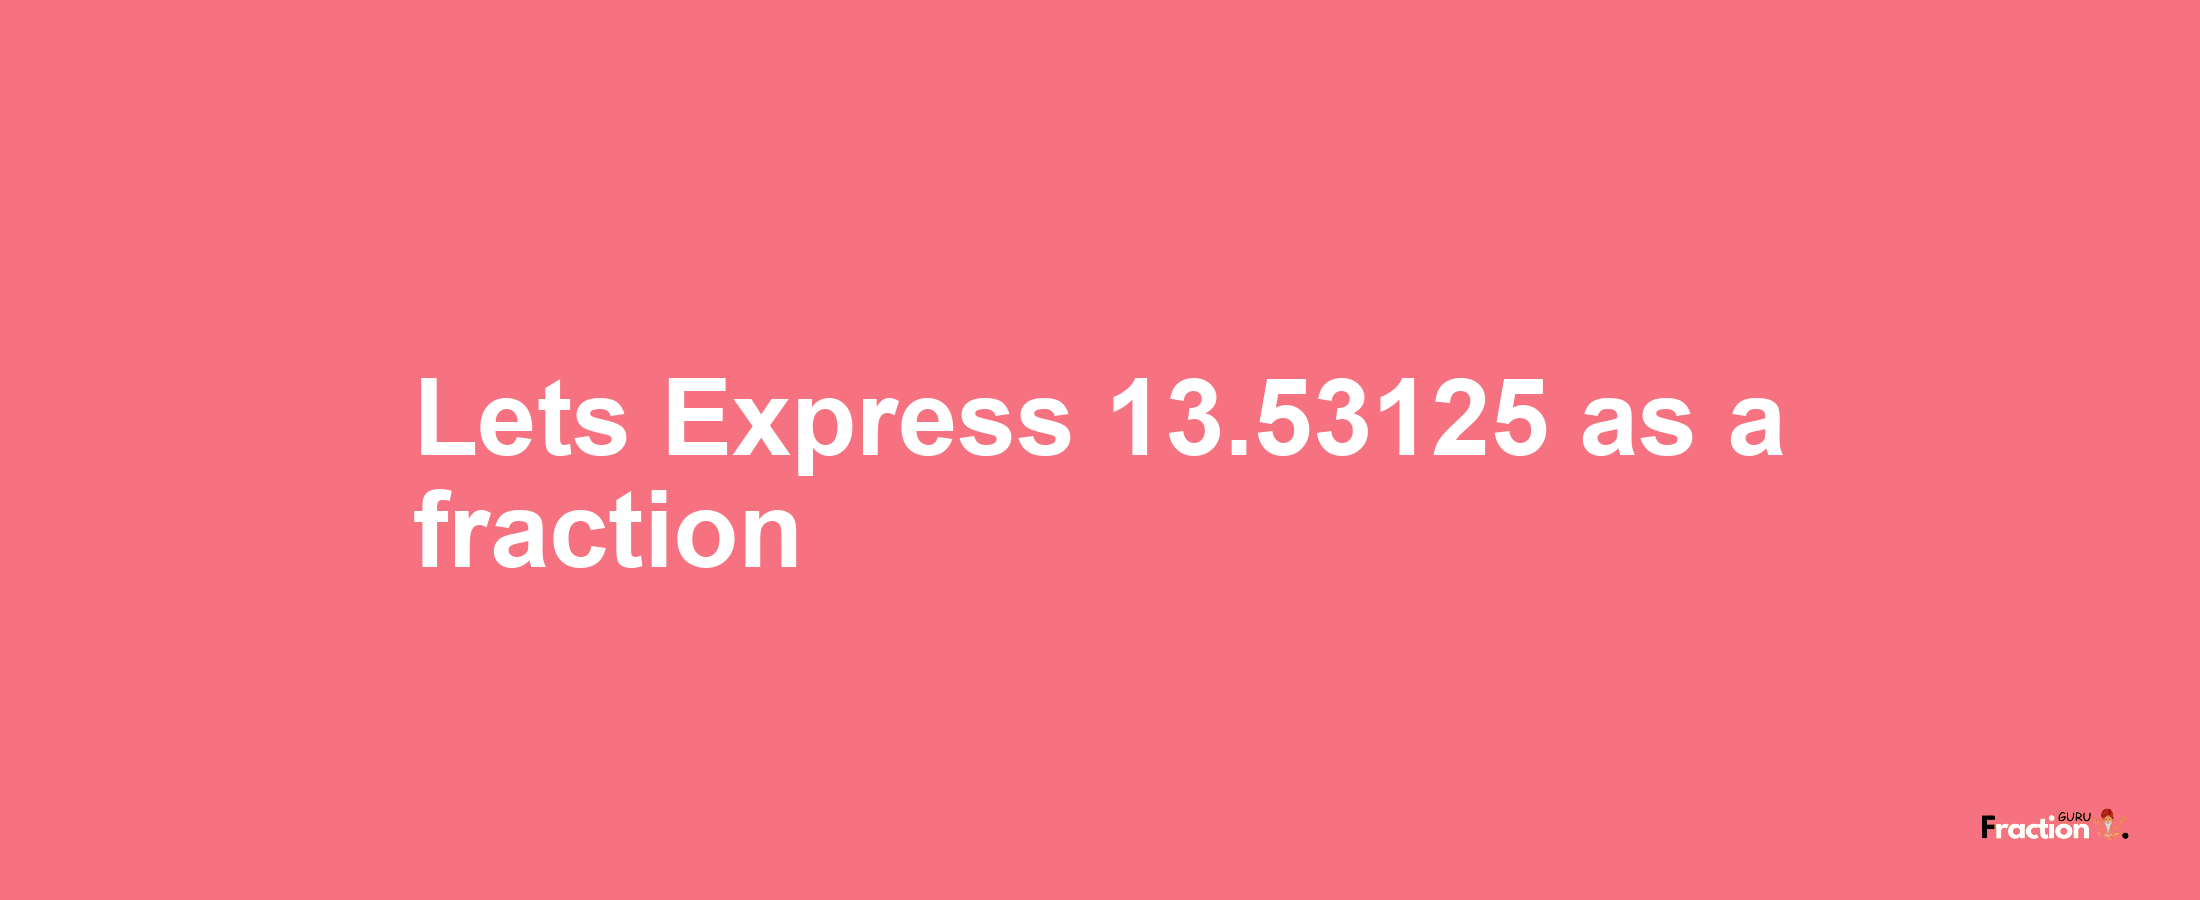 Lets Express 13.53125 as afraction